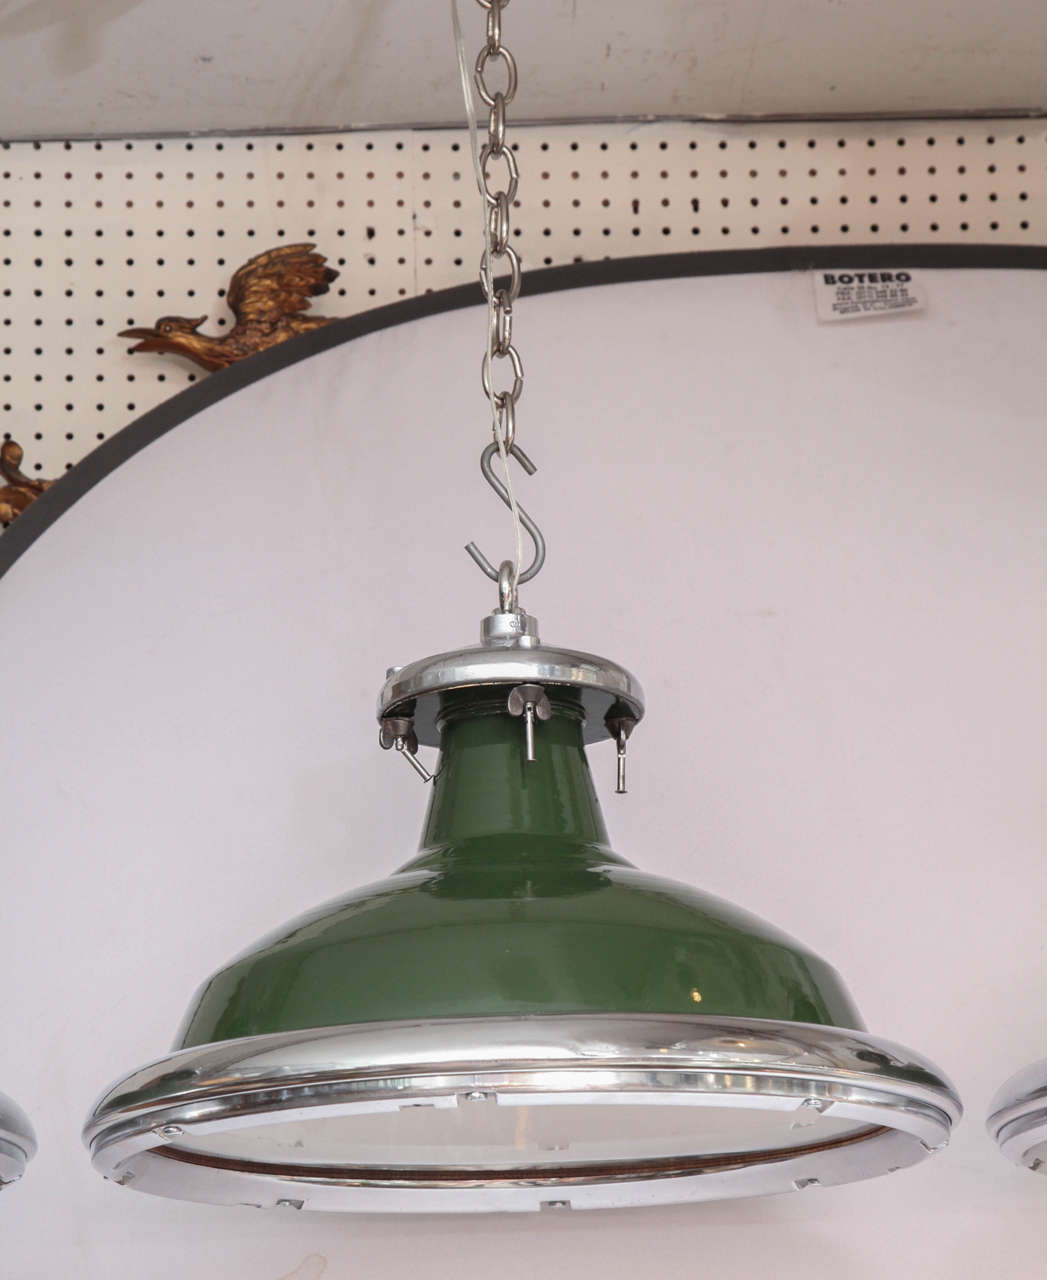 CAN BE PAINTED ANY COLOR

These are handpicked vintage pendants which are originally from military facilities in Wales, UK. These fixtures were actually made to be bombproof by the lighting manufacturer who produced them. 

PLACE OF